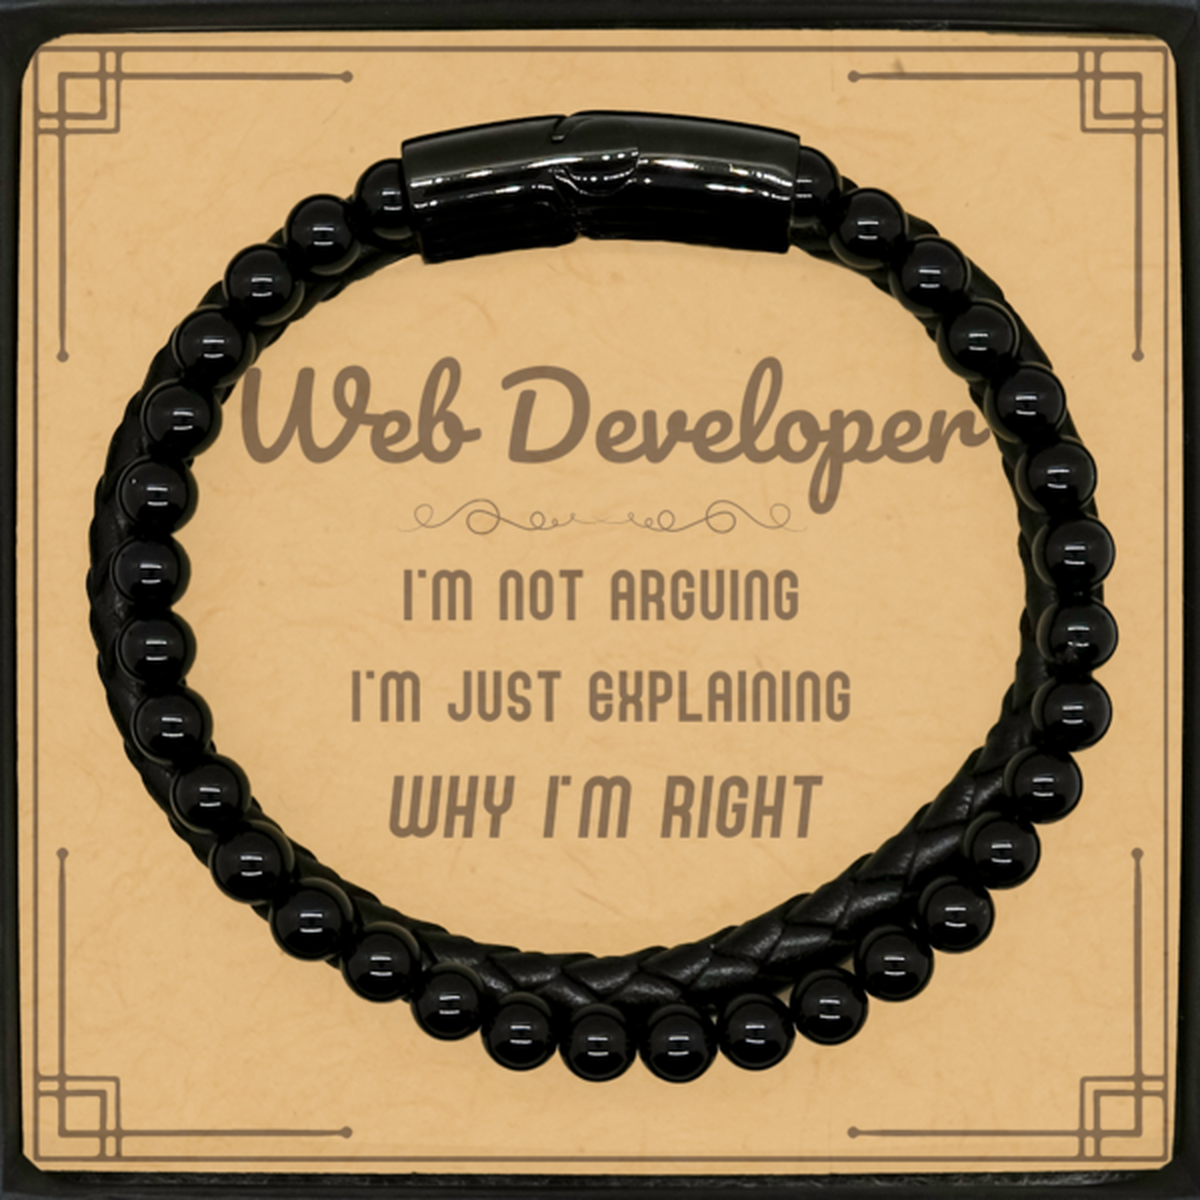 Web Developer I'm not Arguing. I'm Just Explaining Why I'm RIGHT Stone Leather Bracelets, Funny Saying Quote Web Developer Gifts For Web Developer Message Card Graduation Birthday Christmas Gifts for Men Women Coworker